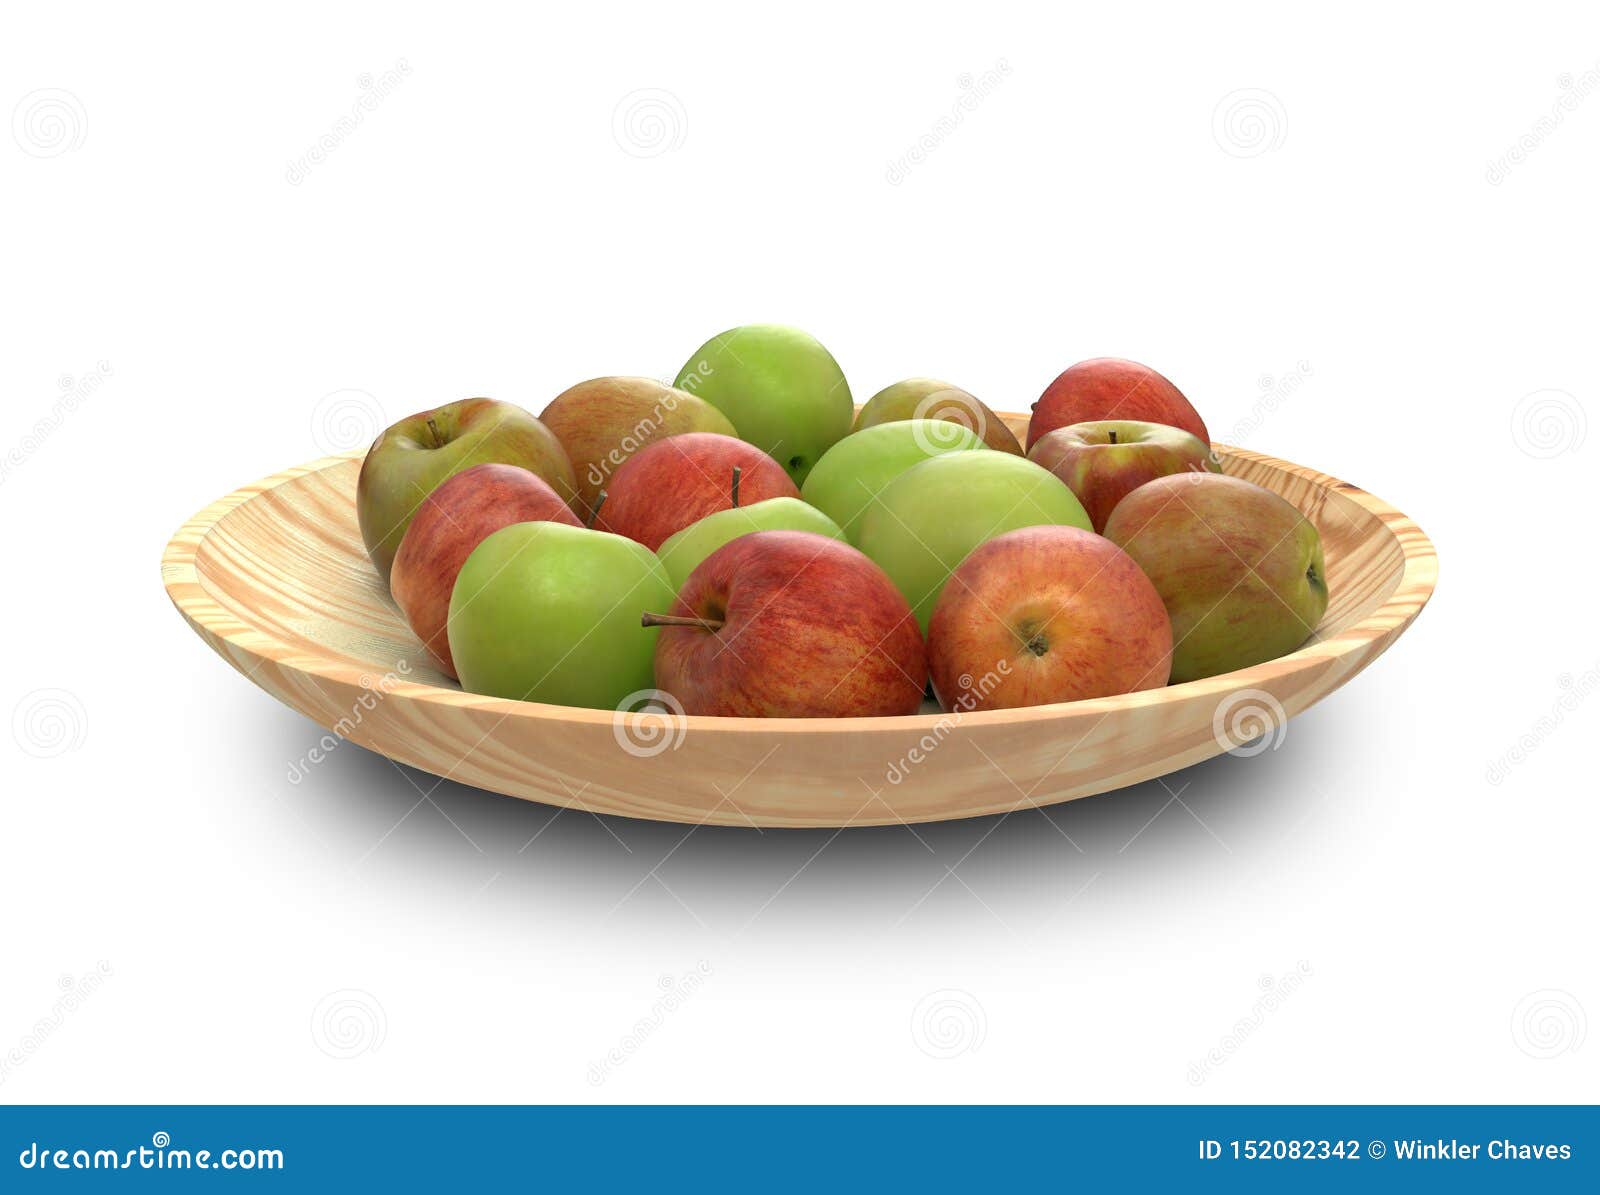 apple green and red, clipping path, maÃÂ§ÃÂ£ manzana